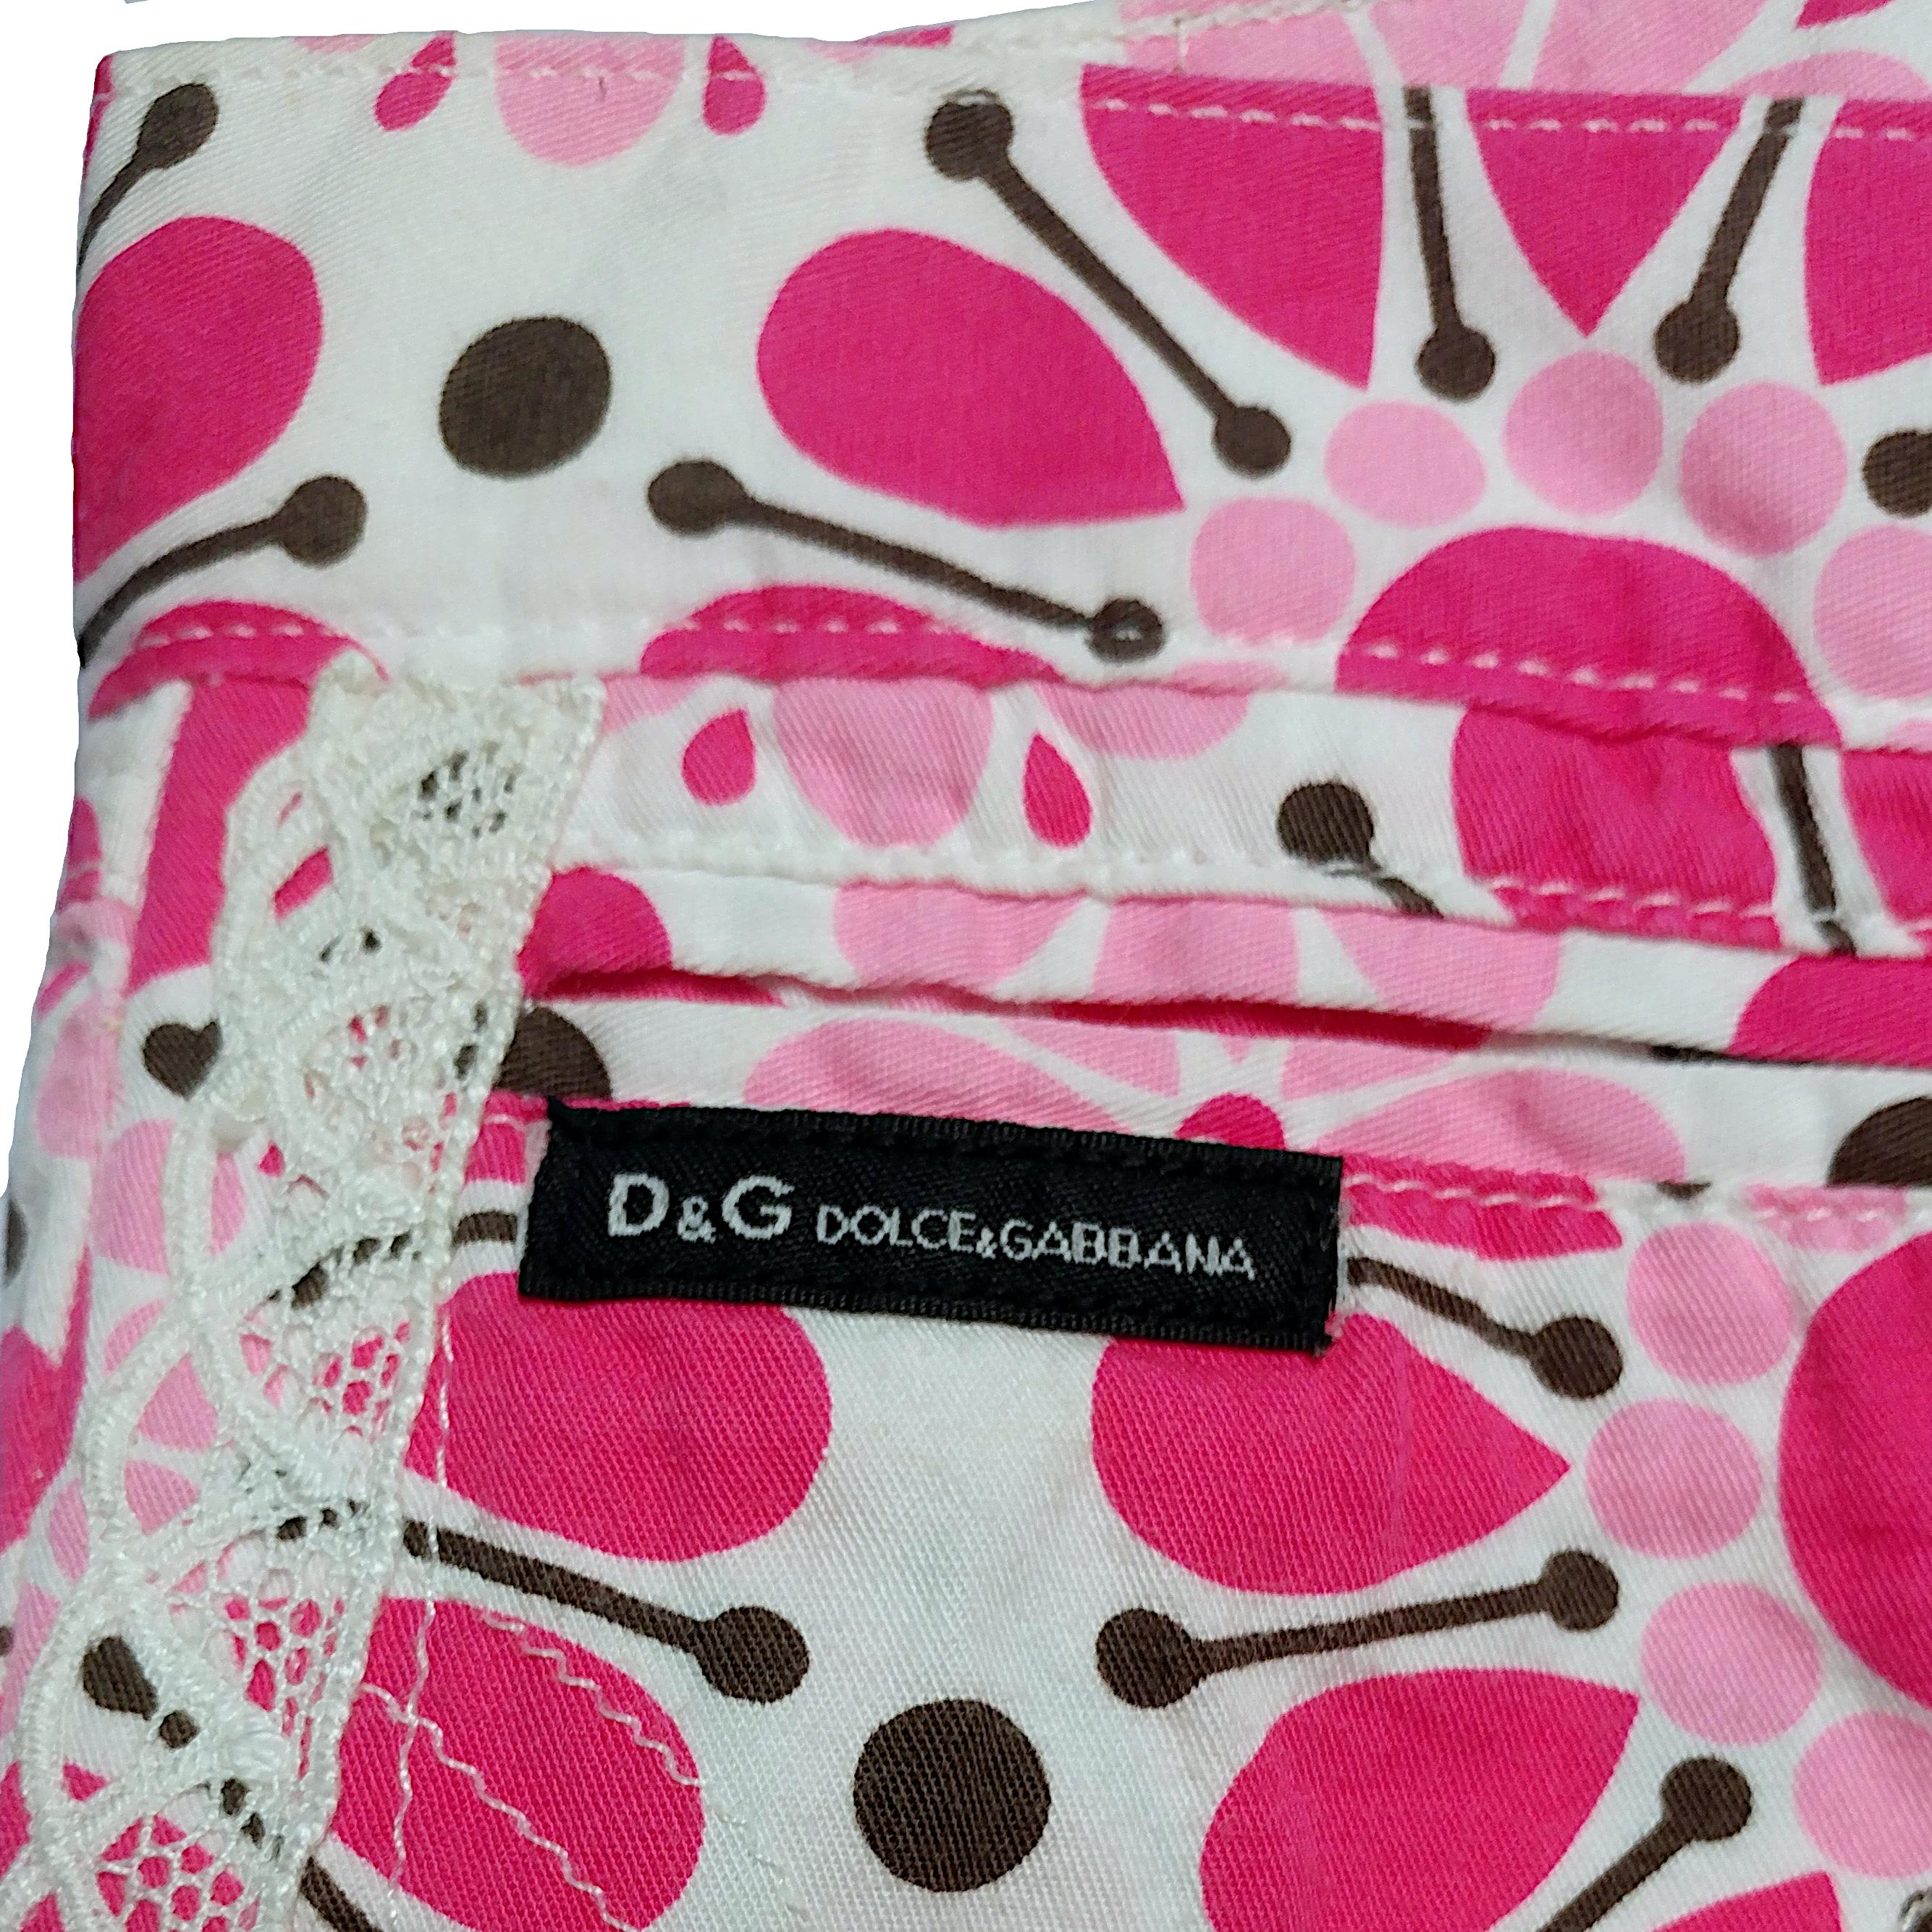 DOLCE&GABBANA  Vintage Cotton White and Pink Shorts with Floral Print  Size S 2